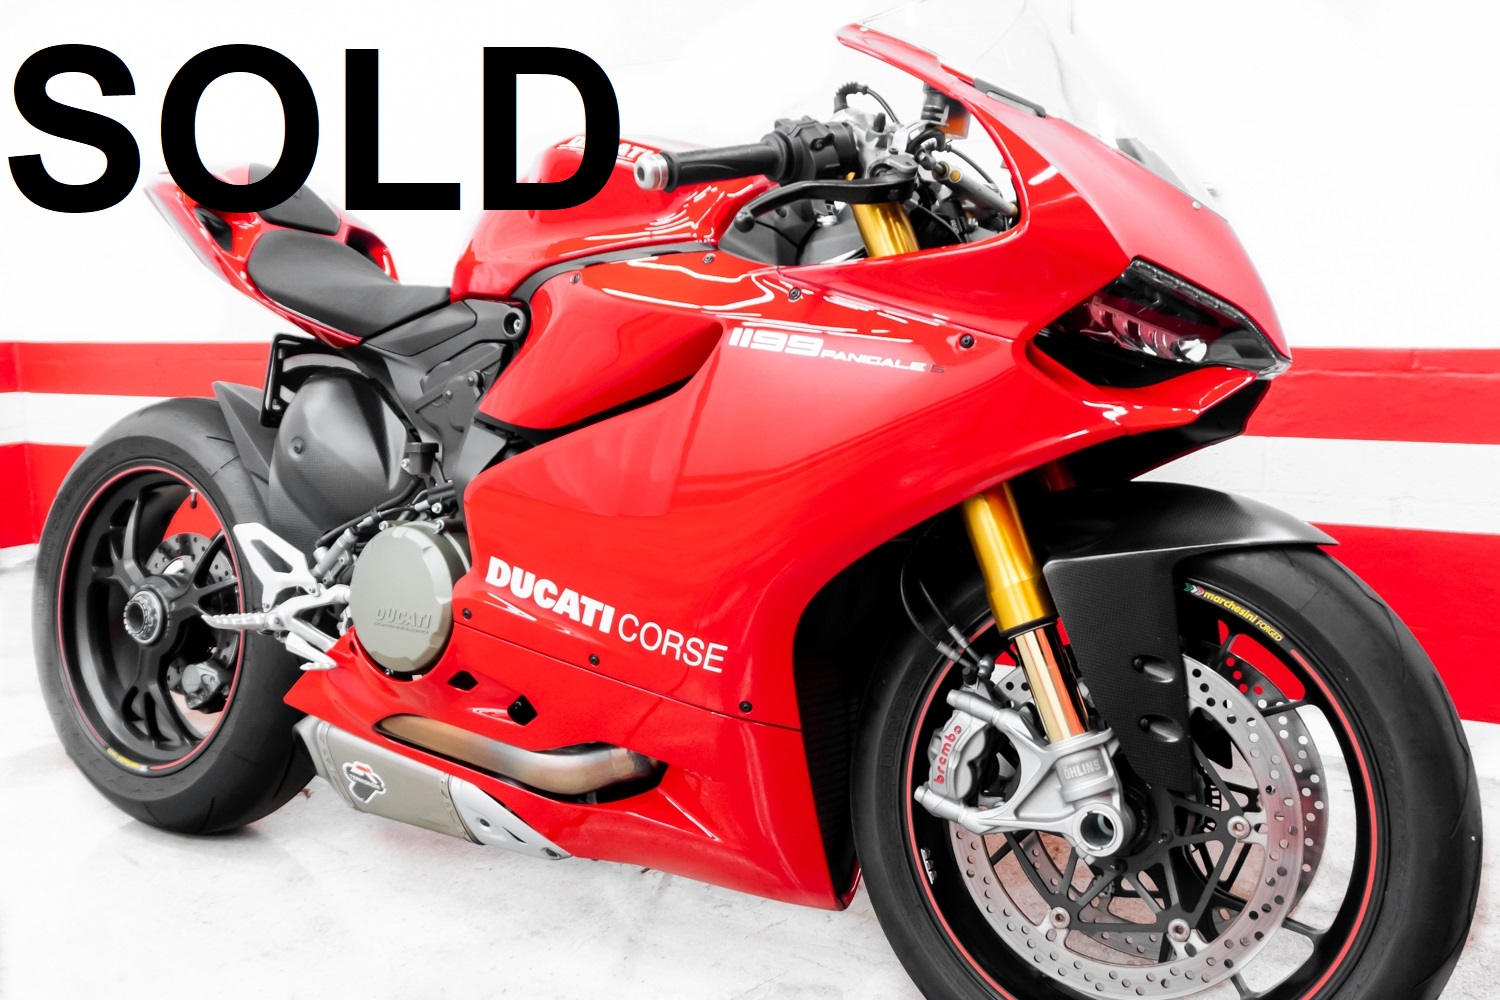 2014 Ducati 1199 Panigale S (ABS)